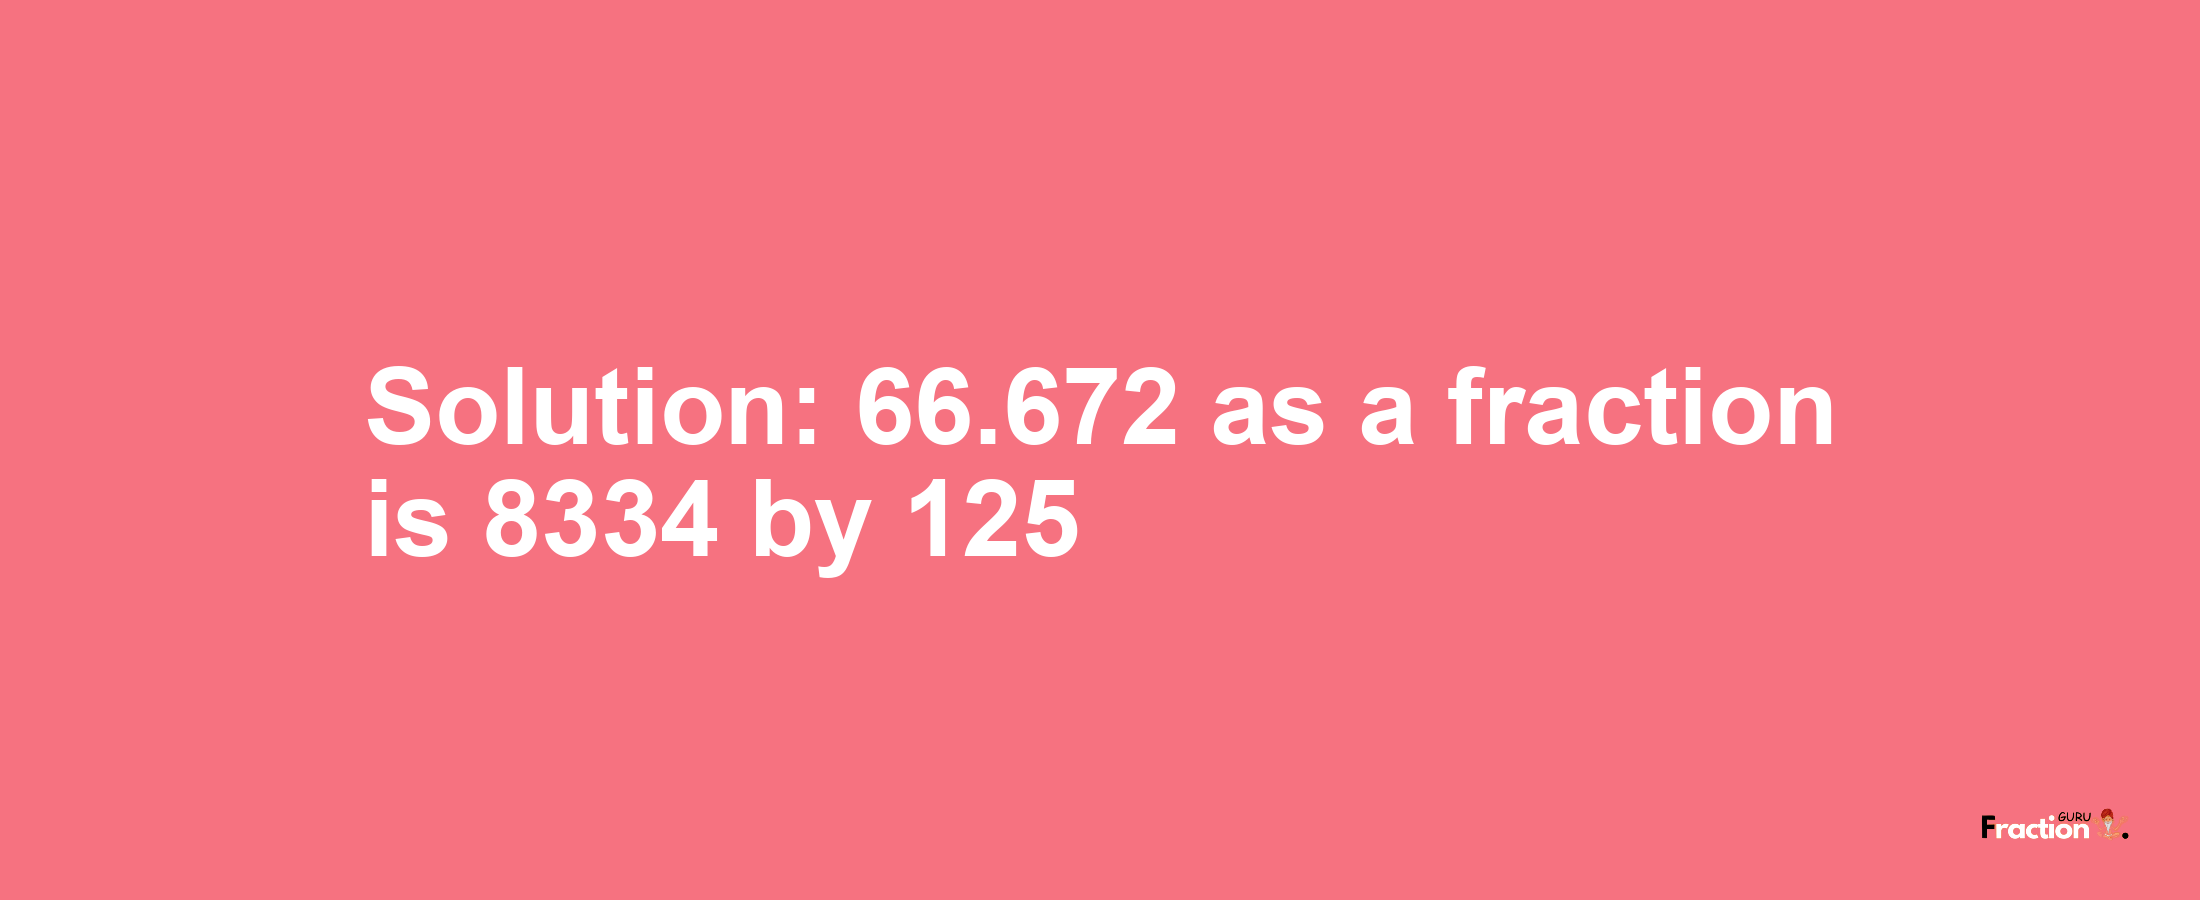 Solution:66.672 as a fraction is 8334/125